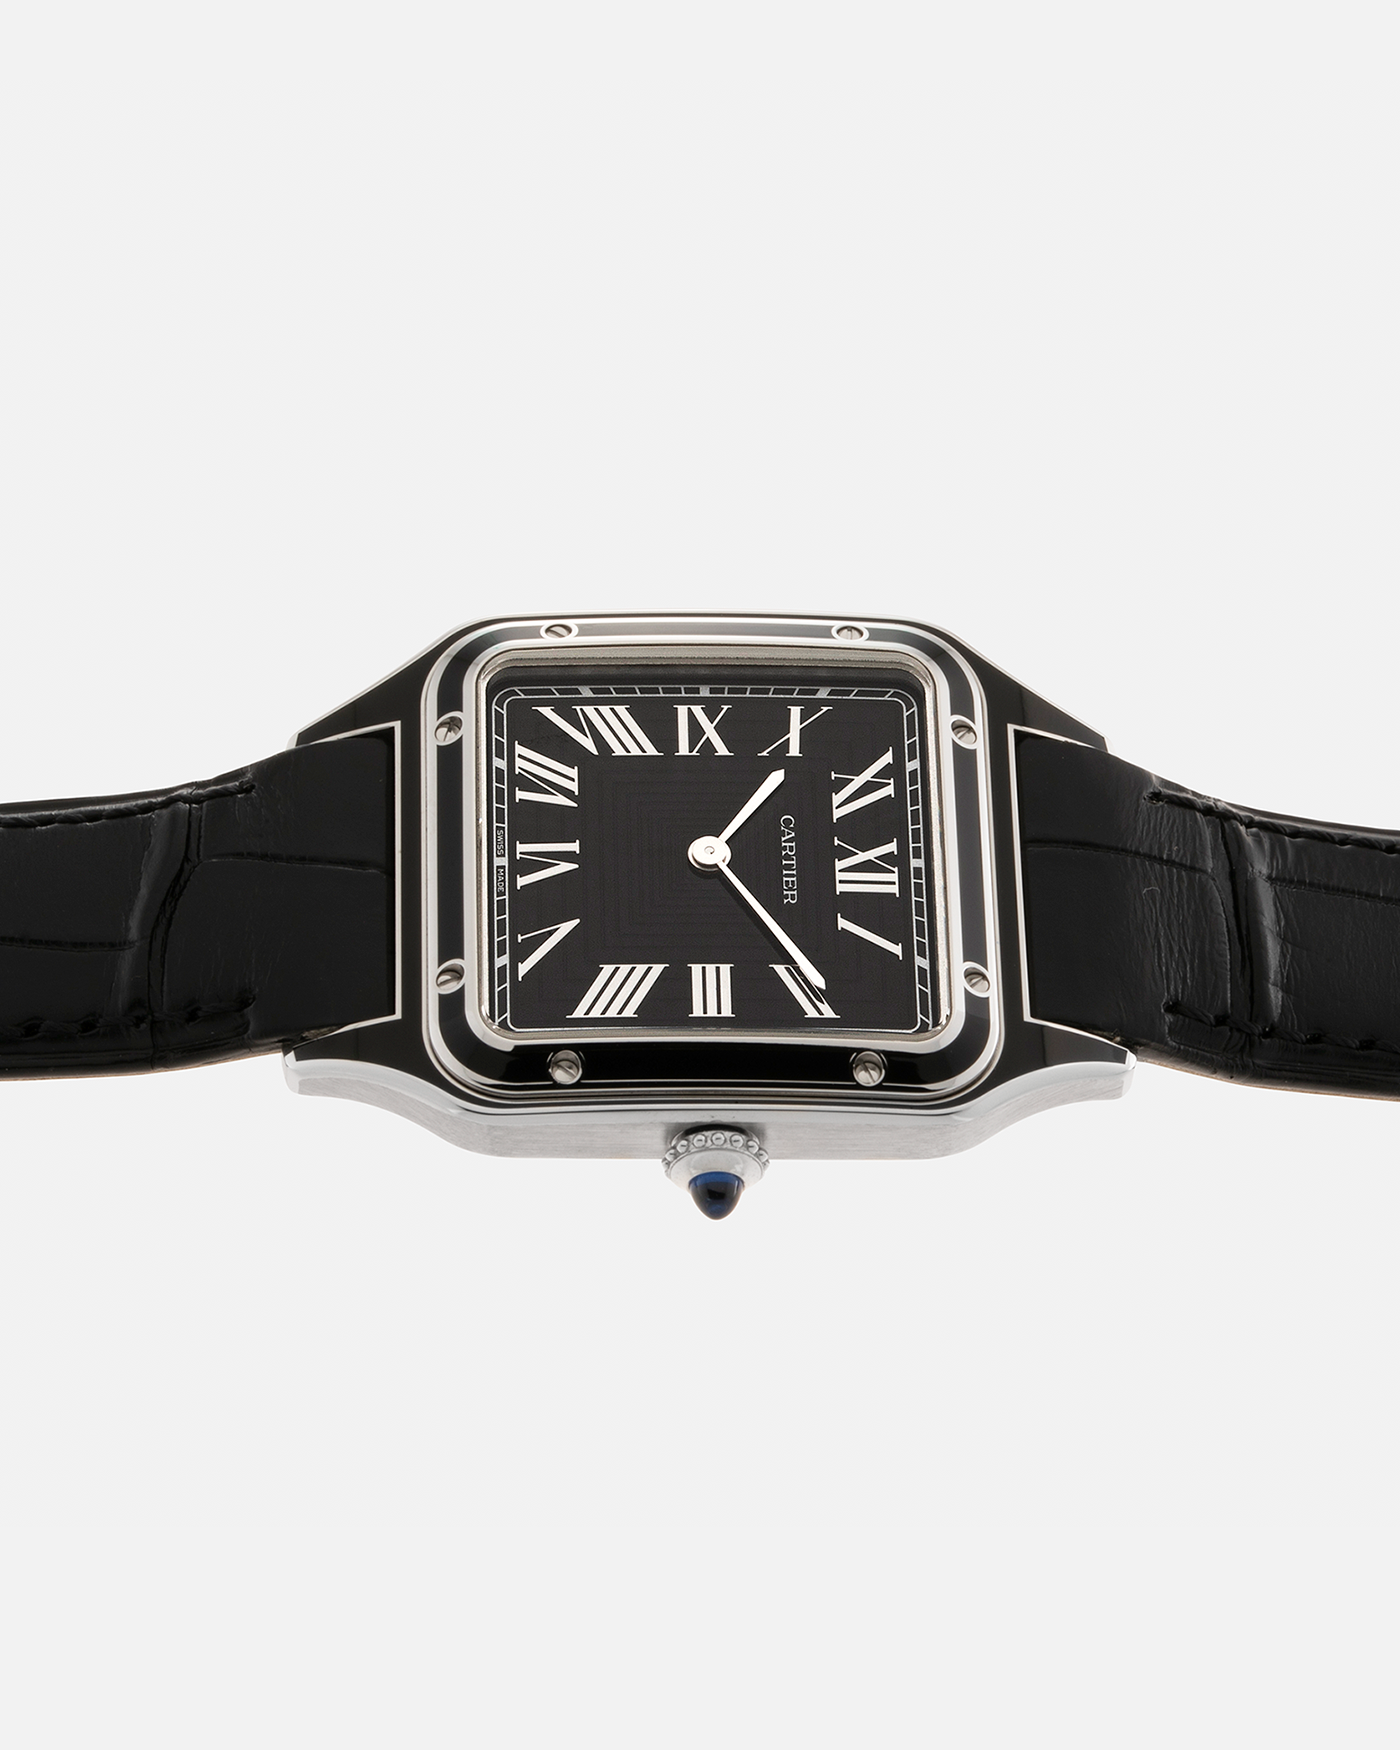 Brand: Cartier Year: 2023 Model: Santos-Dumont Large Reference: CRWSSA0046 Material: Stainless Steel, Black Lacquer Movement: Cartier Cal. 430 MC, Manual-Winding Case Diameter: 43.5mm x 31.4mm Strap: Cartier Black Alligator Leather Strap with Signed Stainless Steel Tang Buckle